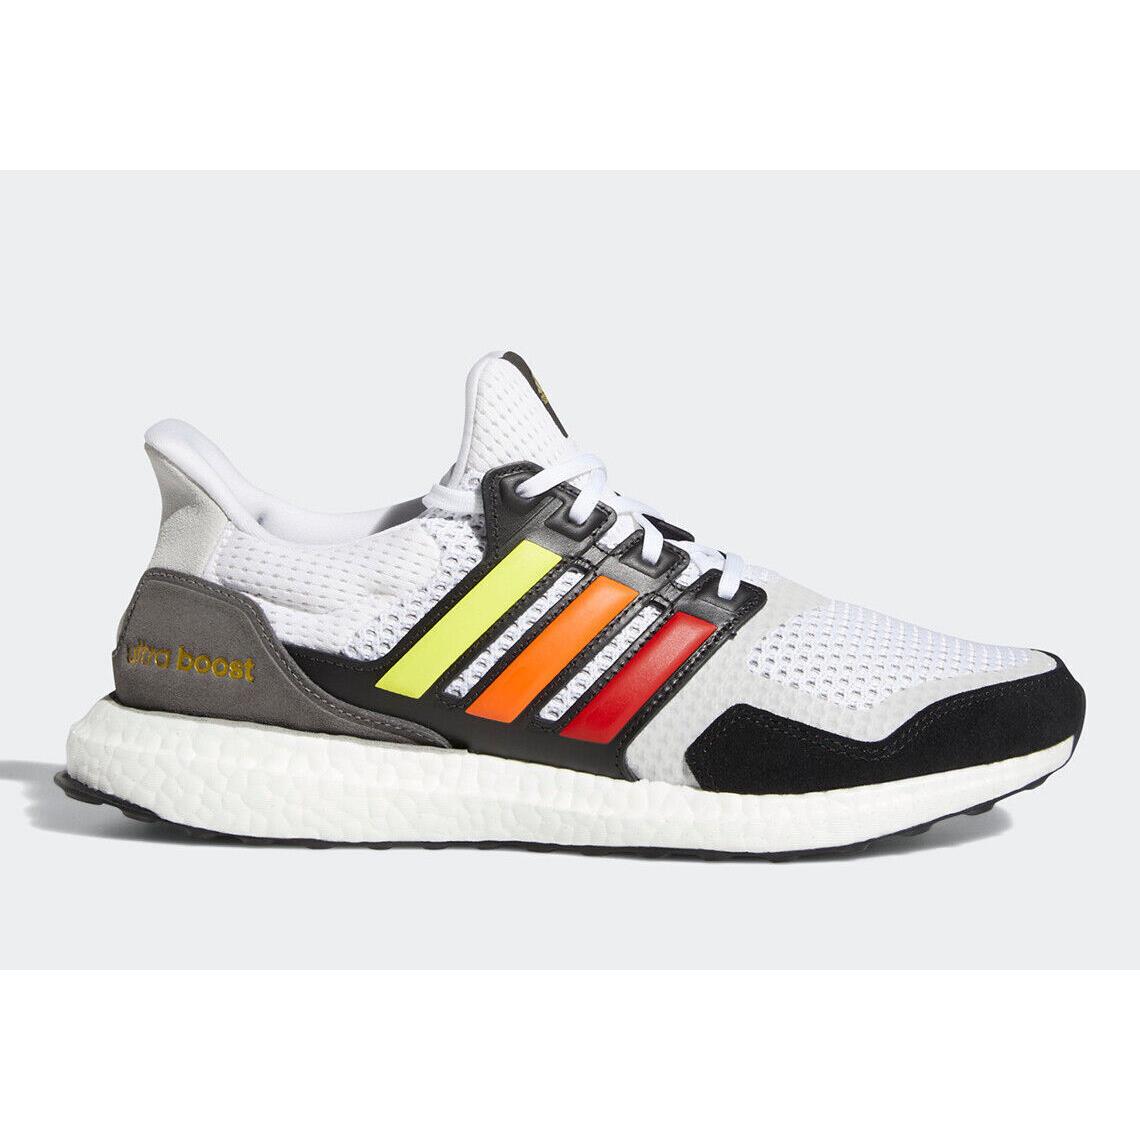 Adidas Ultraboost Men`s FY5347 Ultraboost S L Pride Running White Shoes Sneakers | 692740400044 - Adidas shoes UltraBoost WHITE/BLACK/RED/YELLOW/ORANGE & GREY | SporTipTop